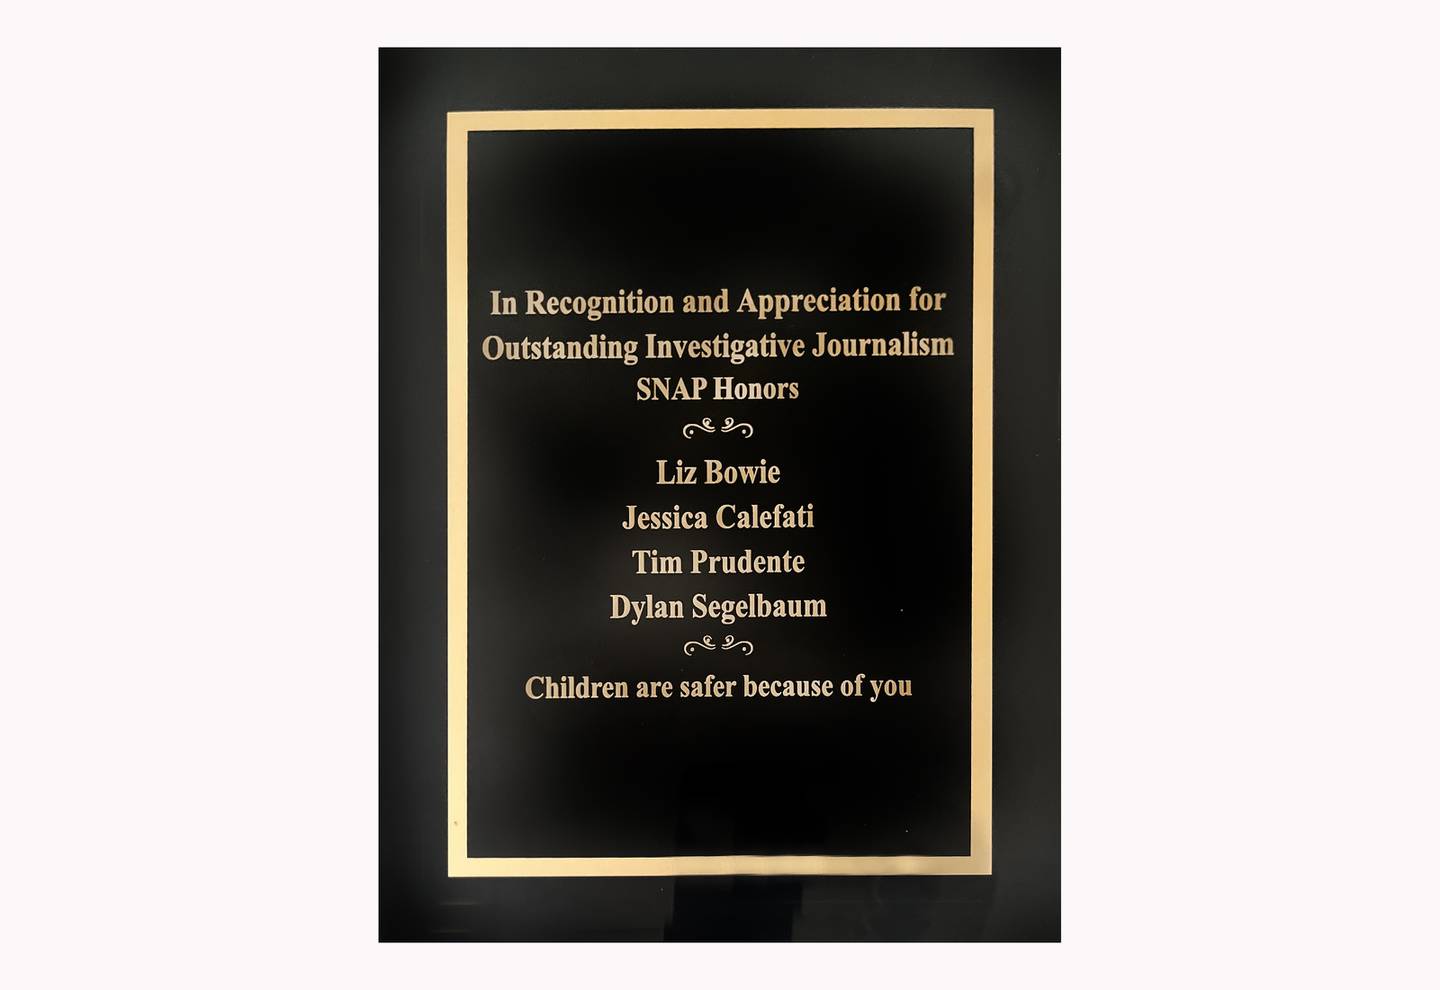 SNAP honored 4 reporters at the Baltimore Banner for OUTSTANDING INVESTIGATIVE JOURNALISM.